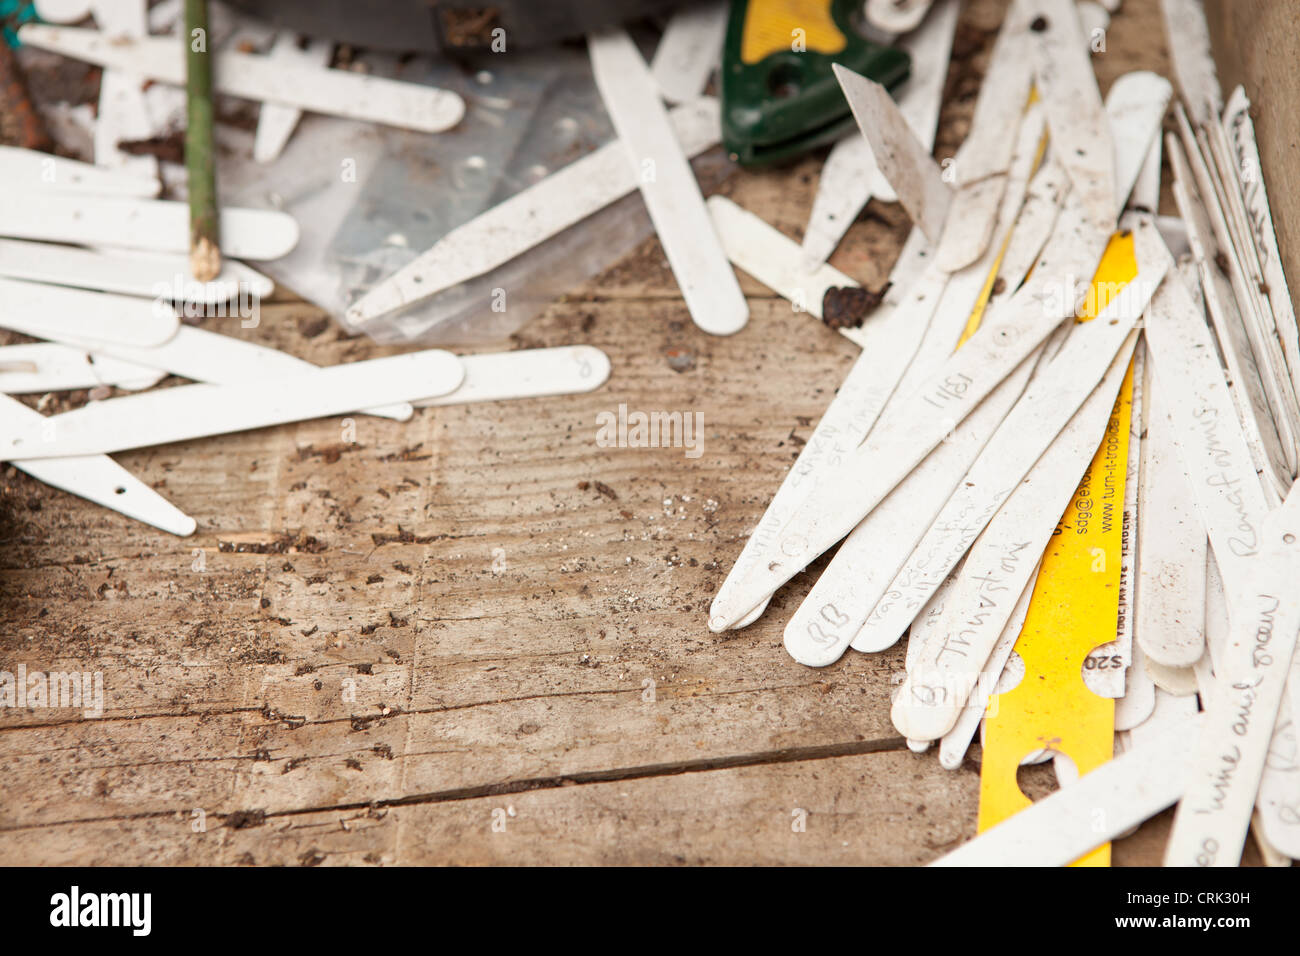 A wooden bench covered in plastic plant pot labels Stock Photo